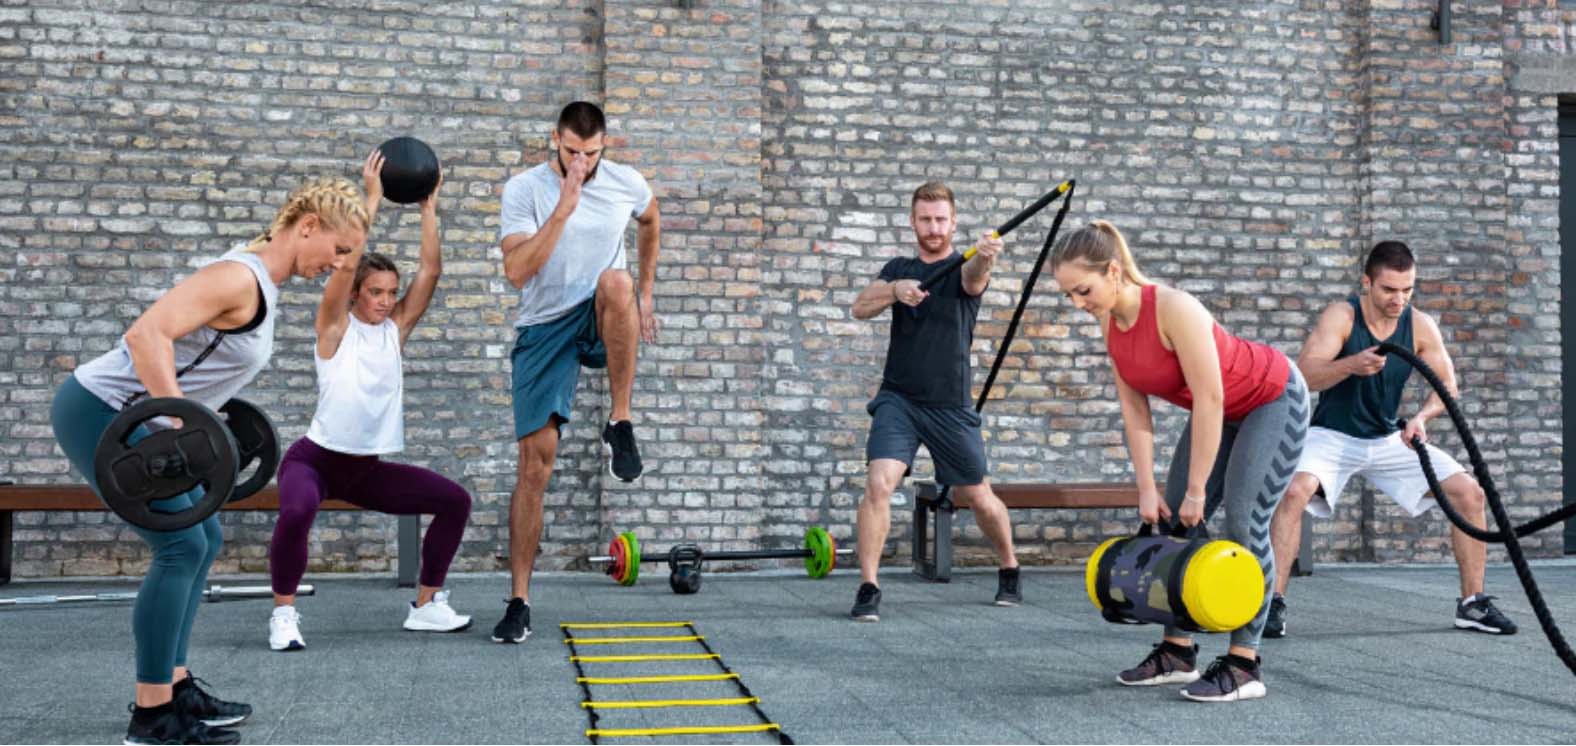 What Is Functional Fitness Training and Why Does It Matter?